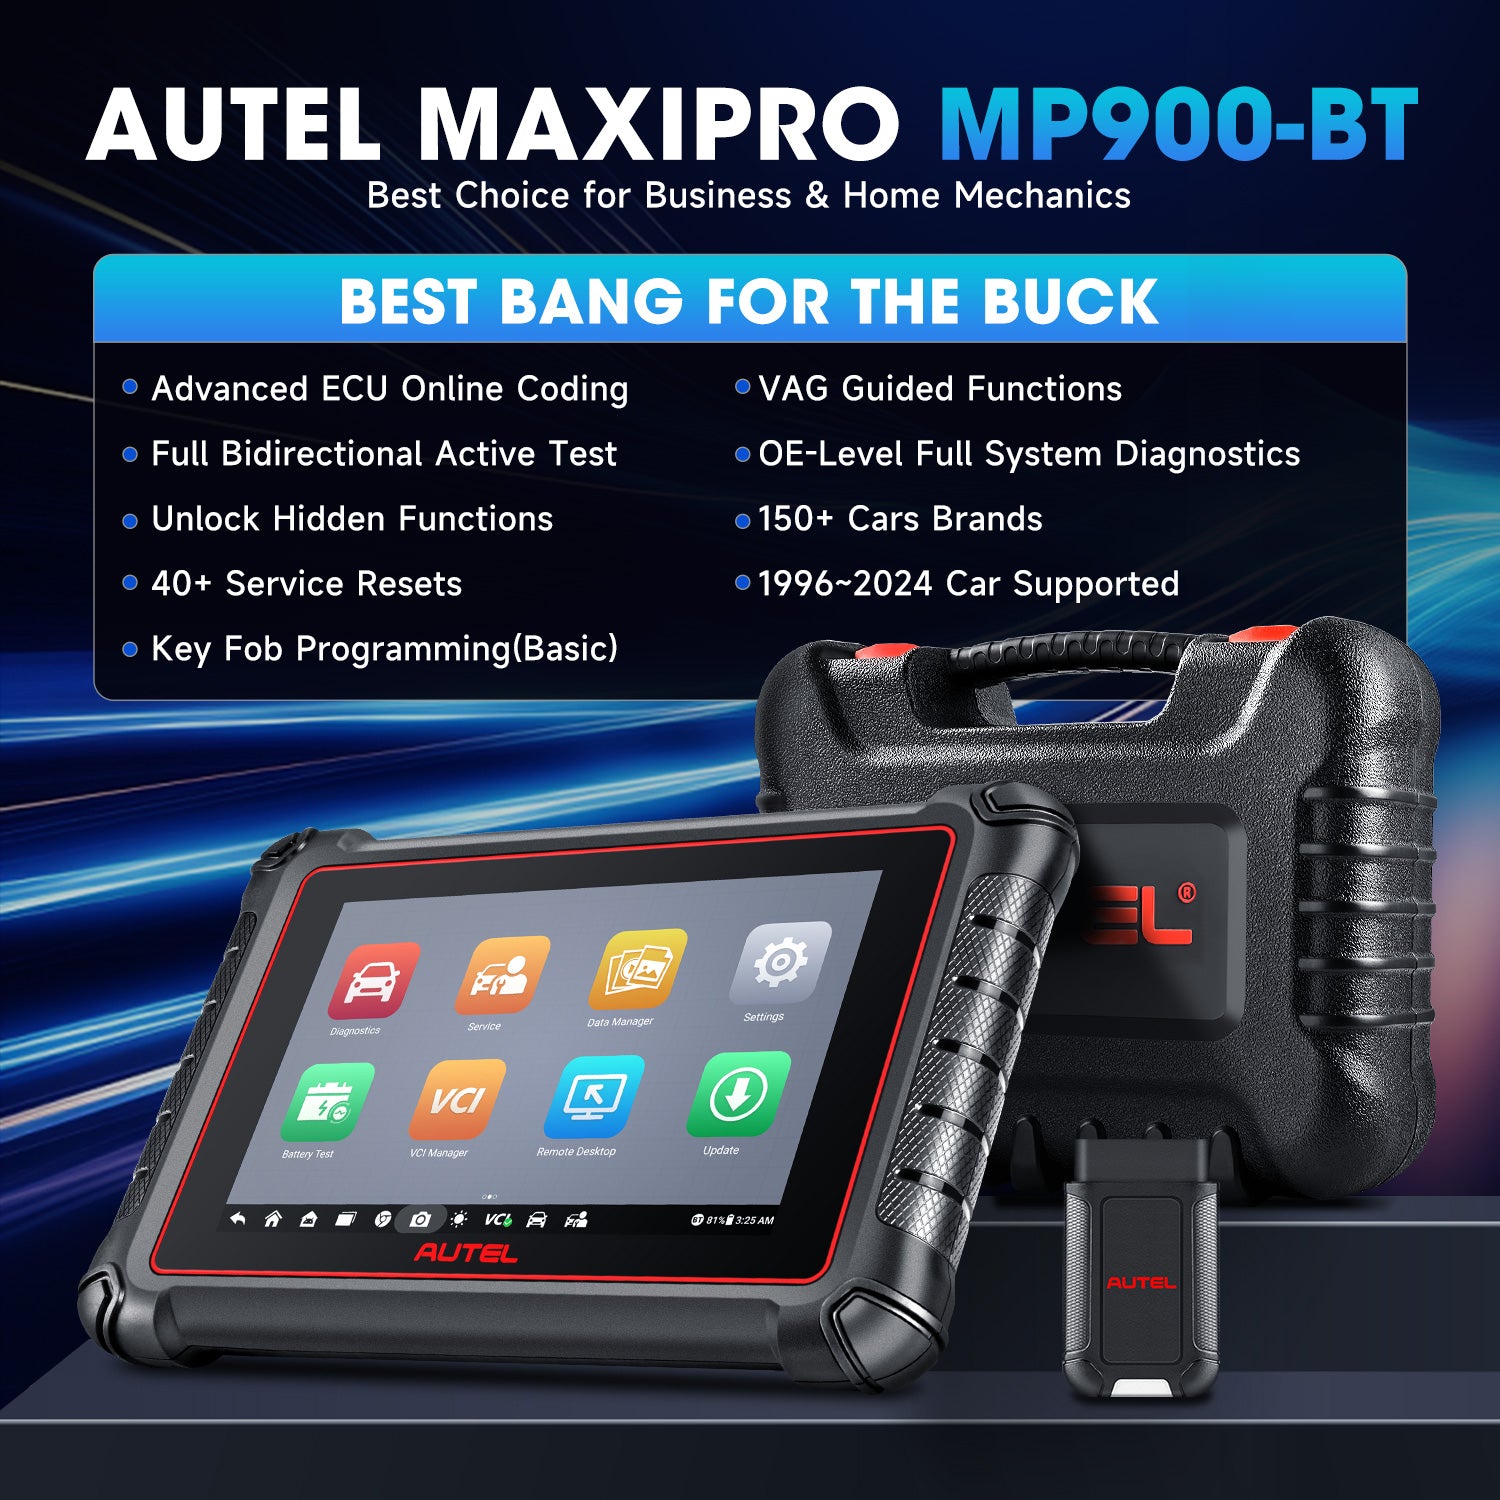 Top Reasons To Buy Autel MaxiPro MP900-BT / MP900Z-BT